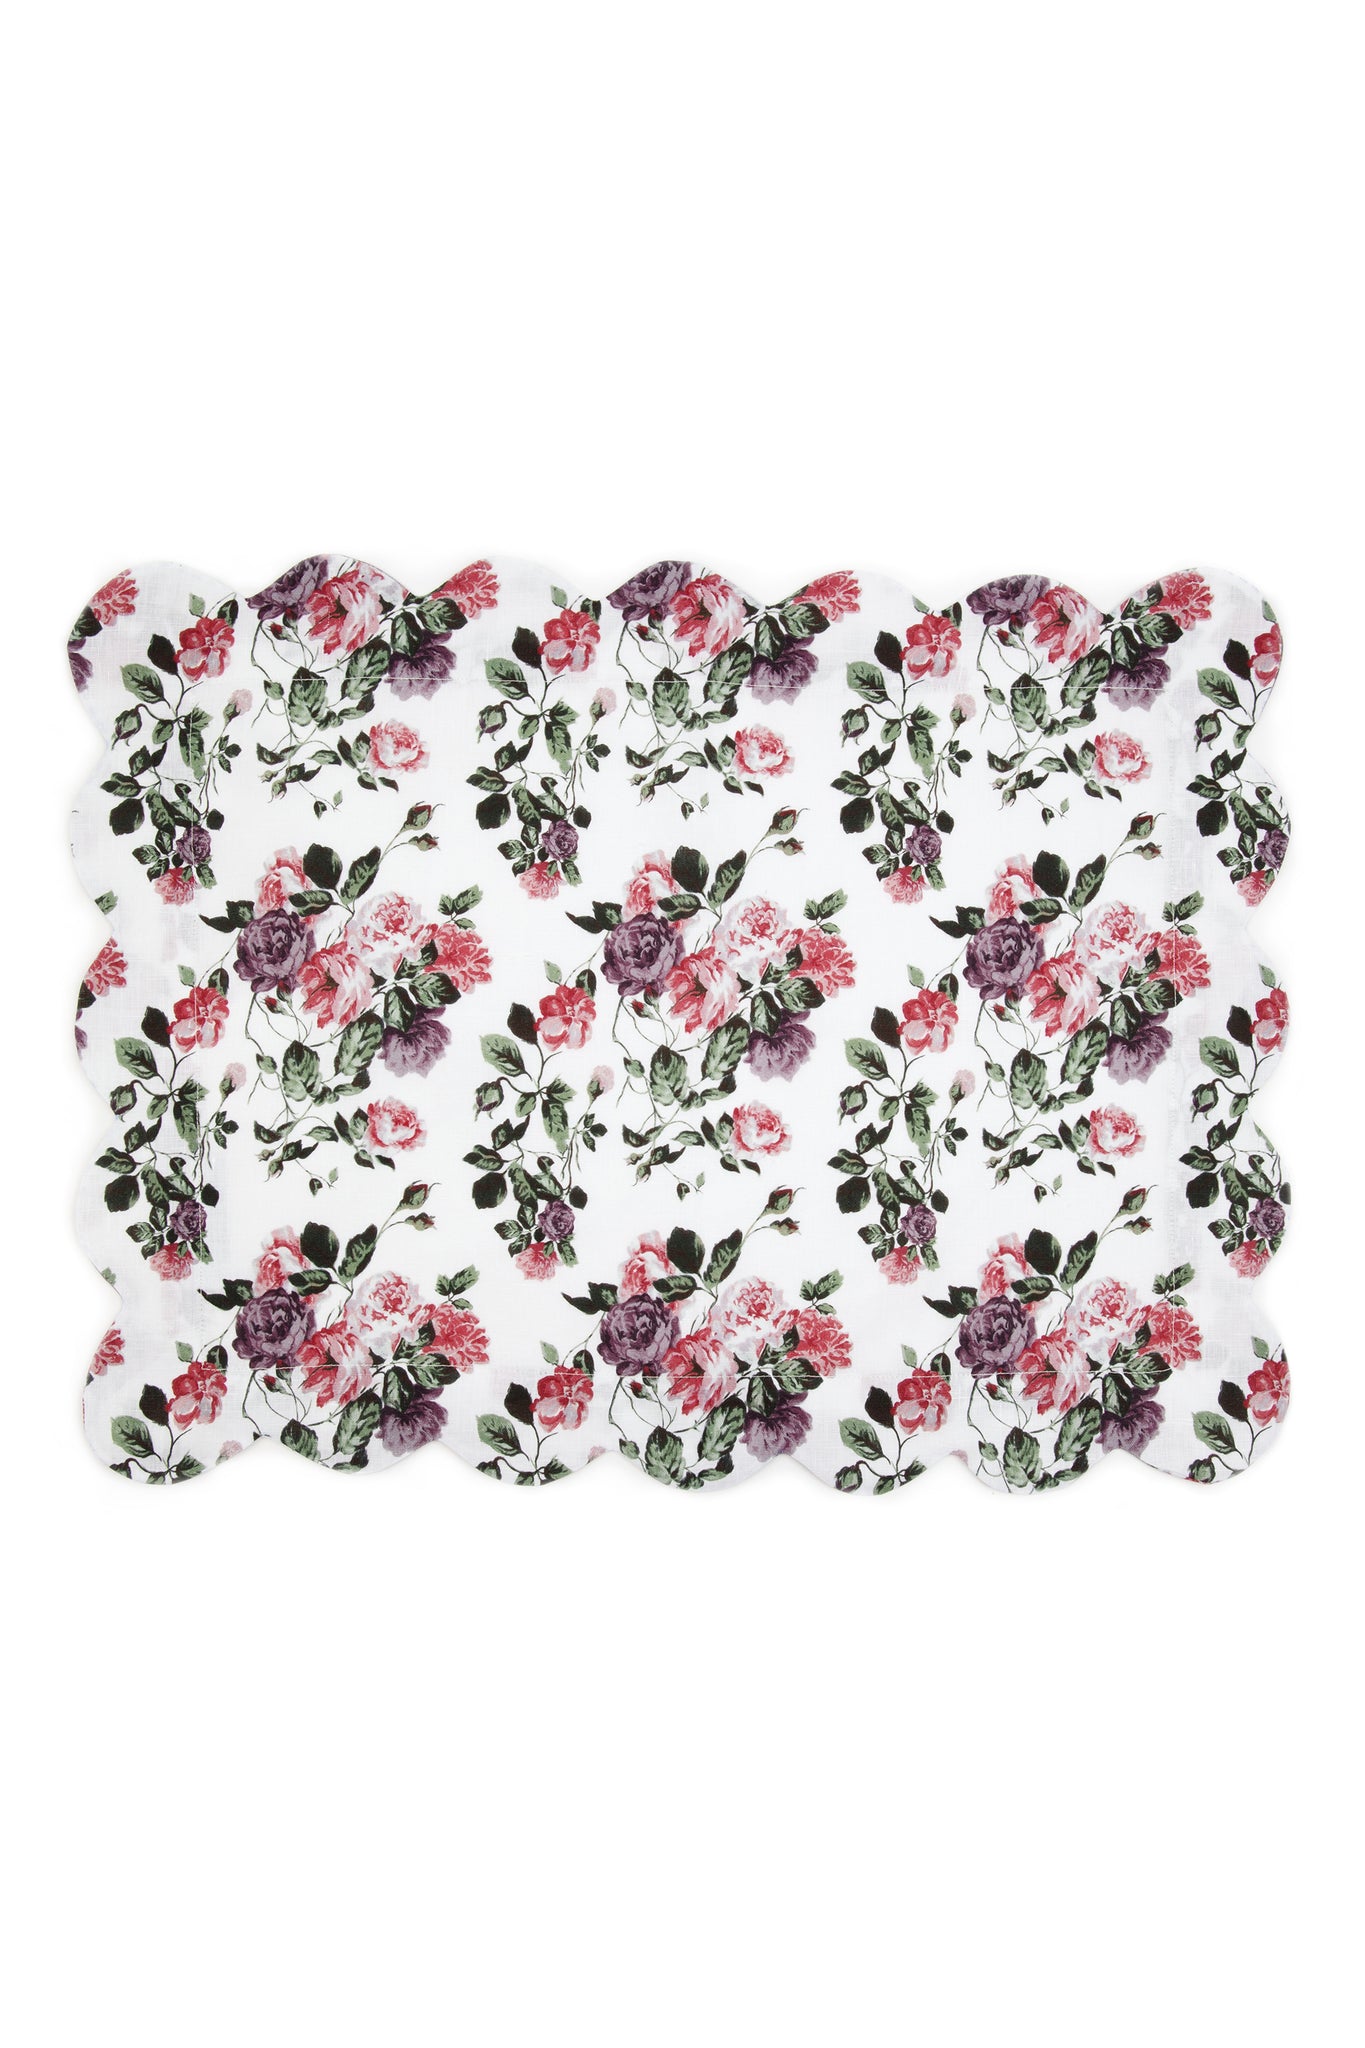 Set of 4 Printed Placemats| Floral Linen | Emilia Wickstead